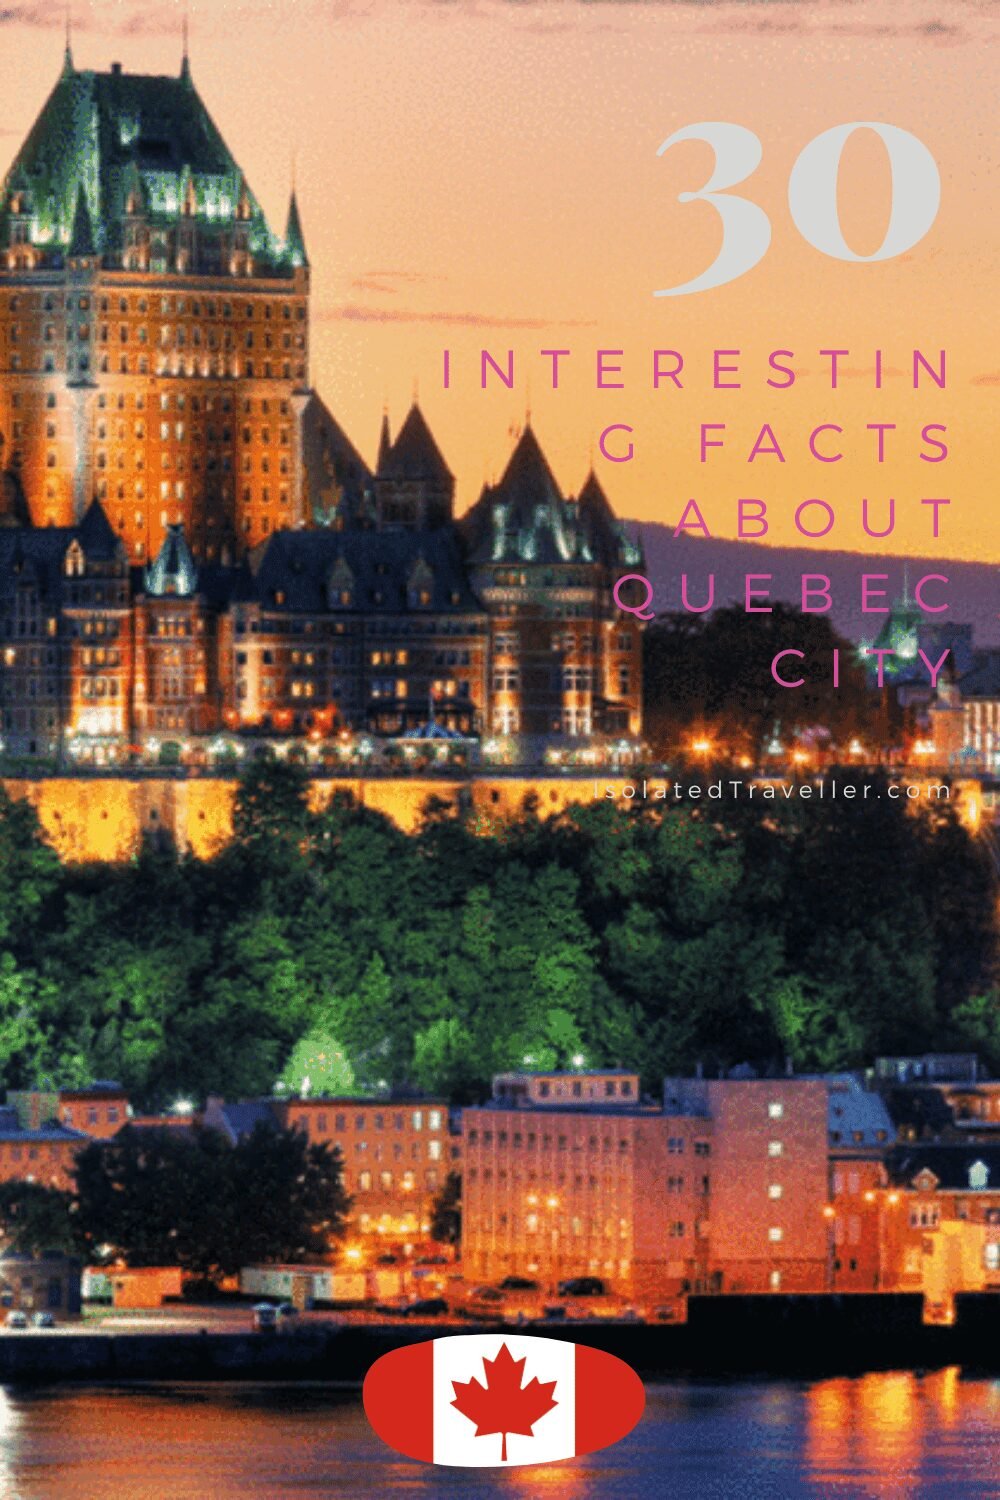 Facts About Quebec City